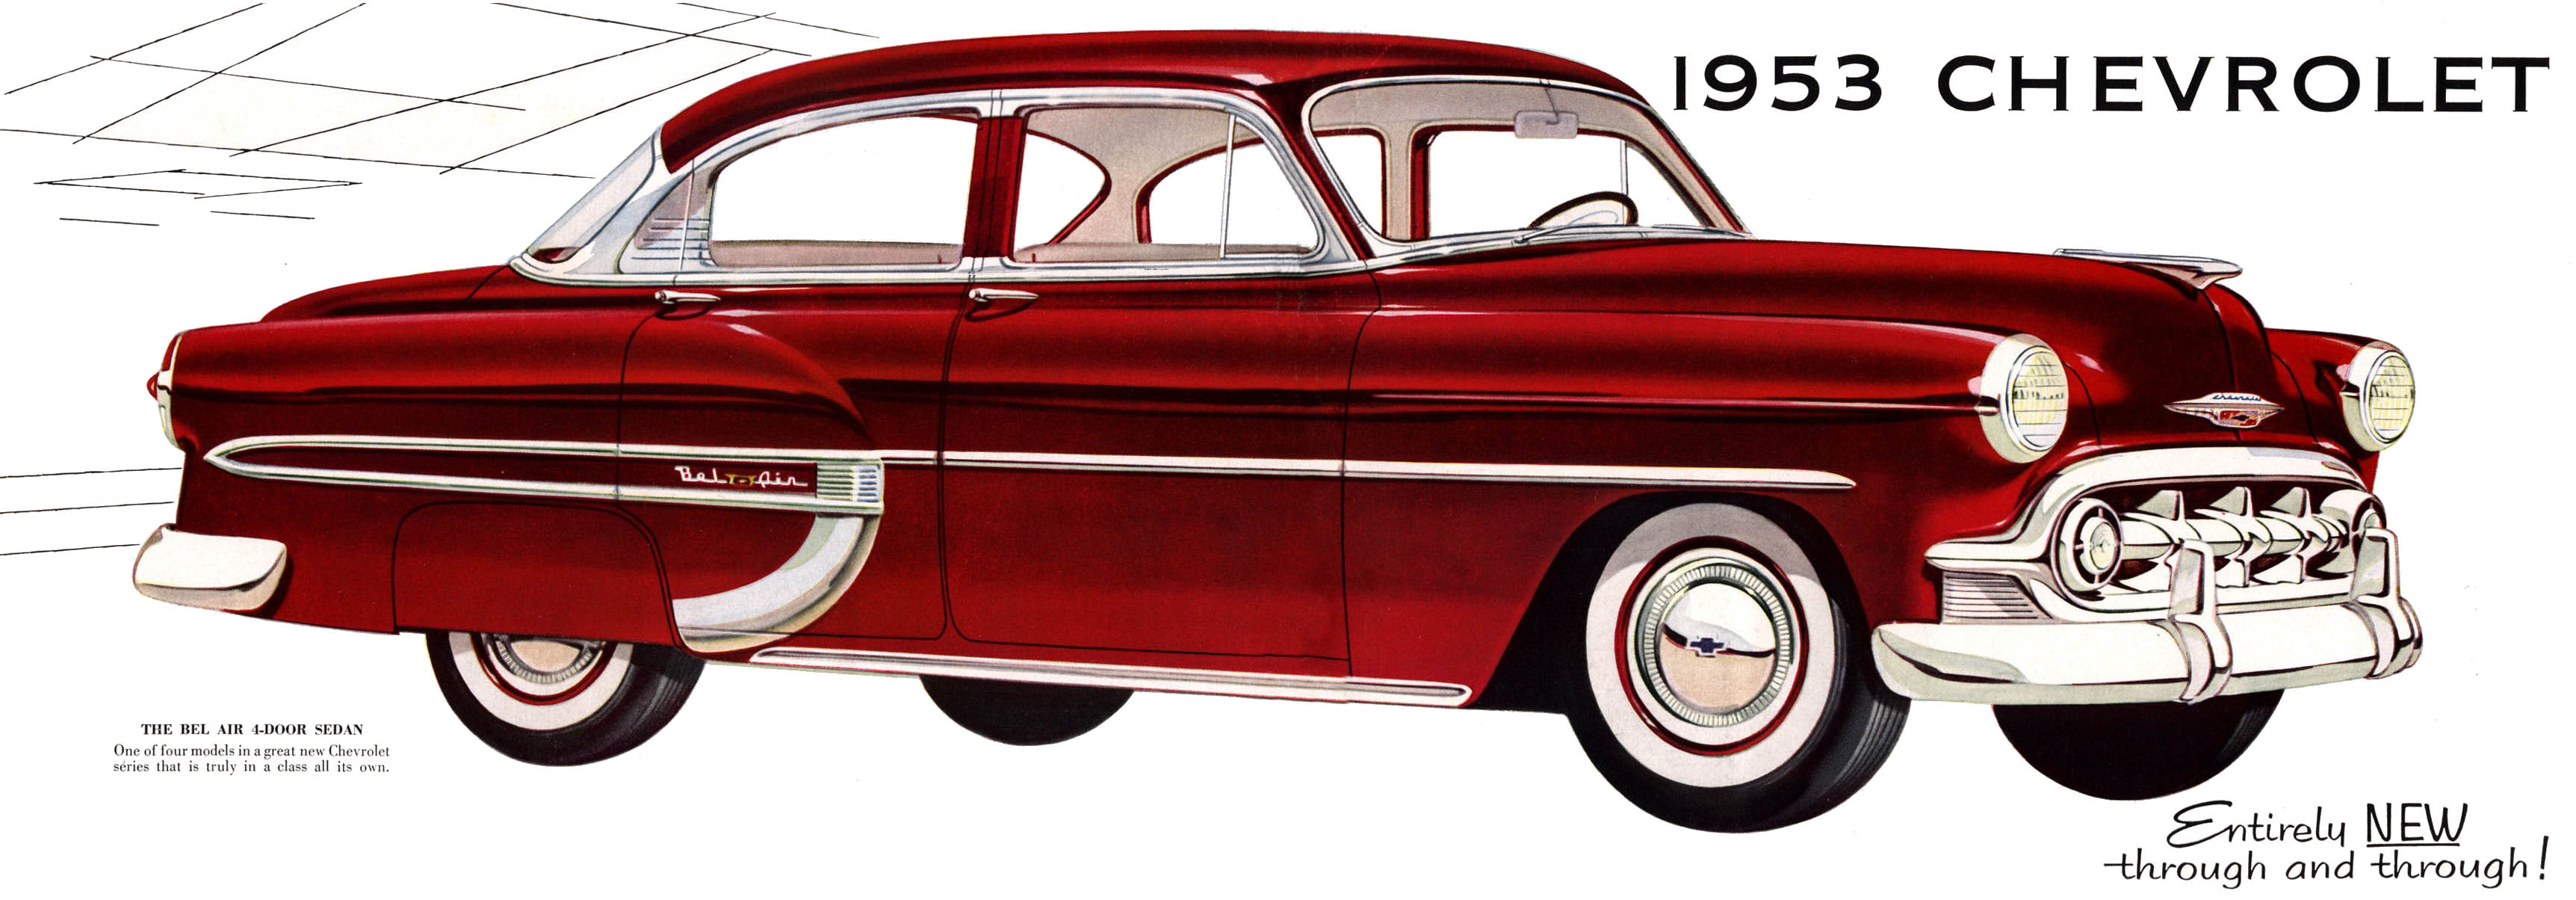 1953_Chevrolet-20_and_01